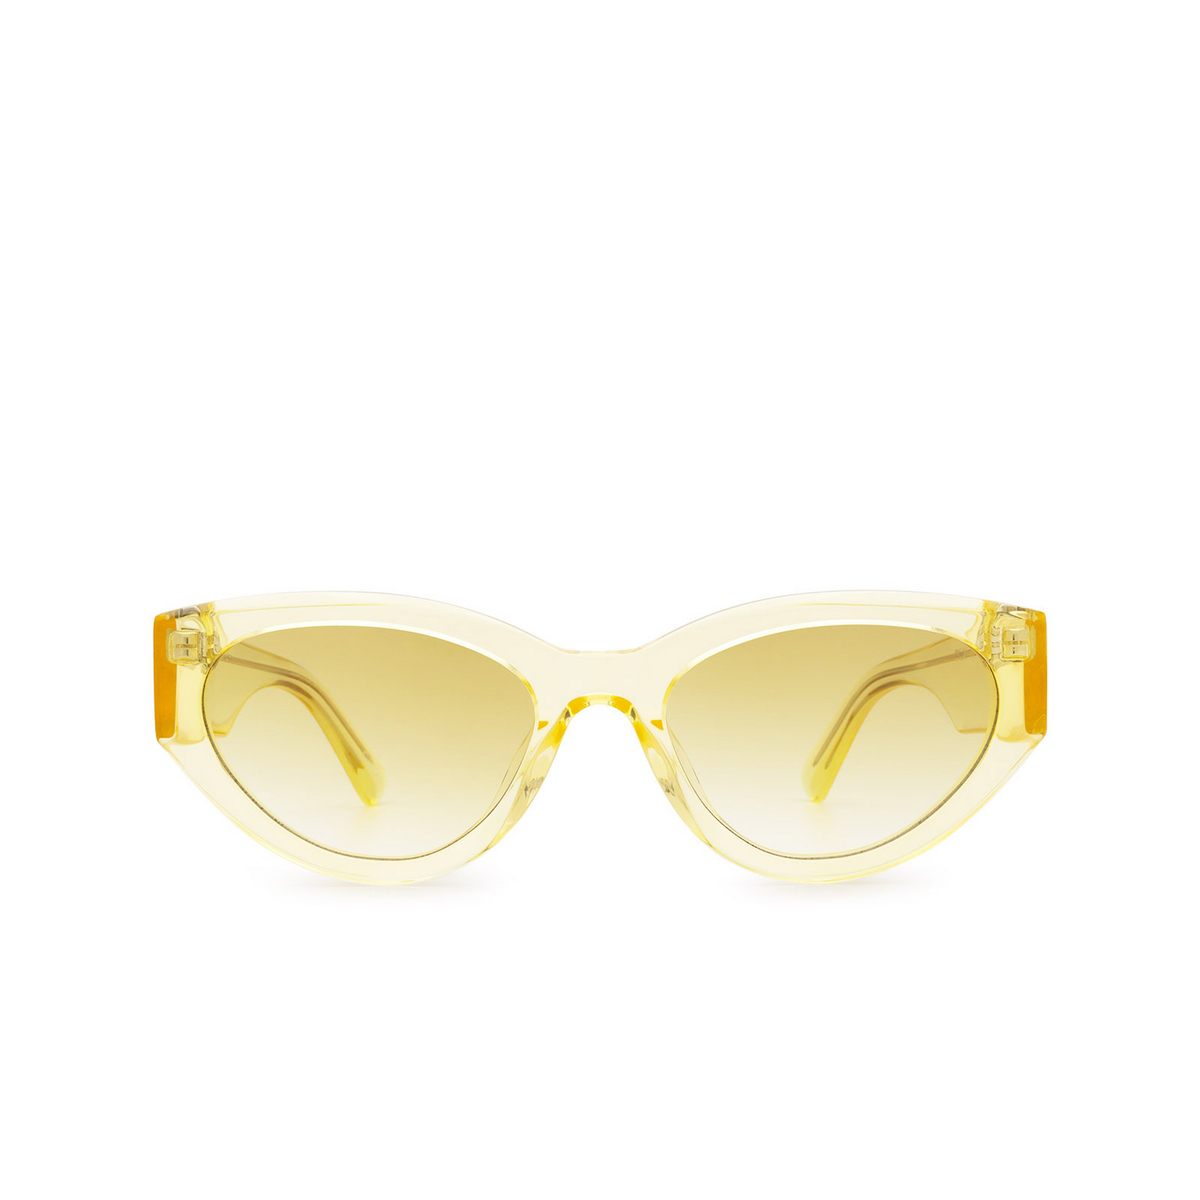 Chimi® Cat-eye Sunglasses: 06 color Yellow - front view.